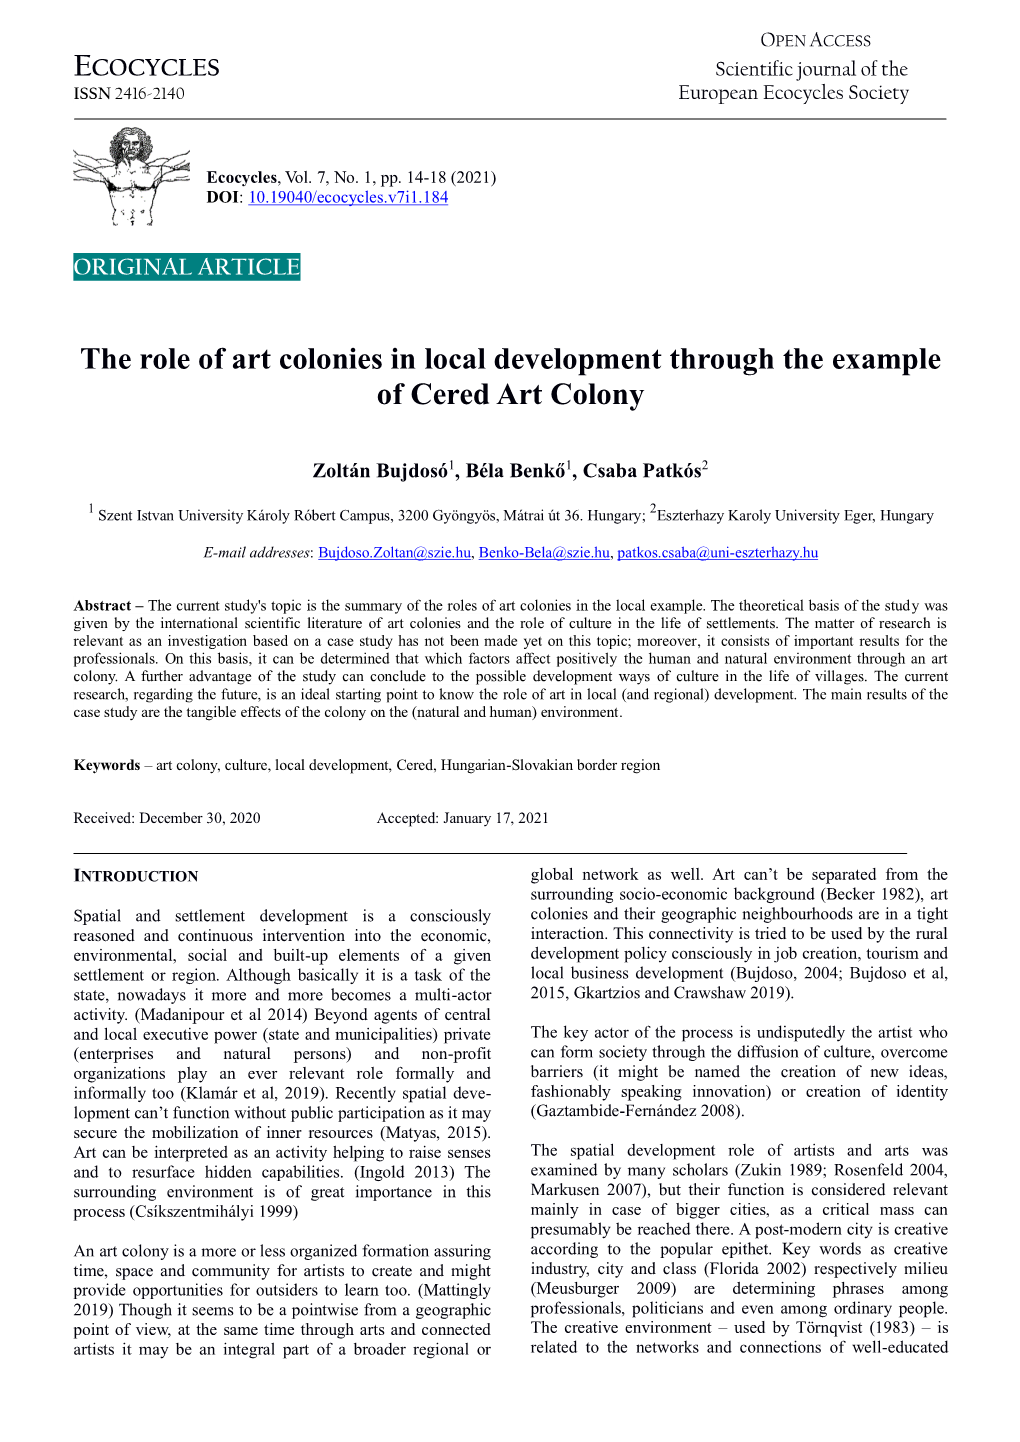 The Role of Art Colonies in Local Development Through the Example of Cered Art Colony